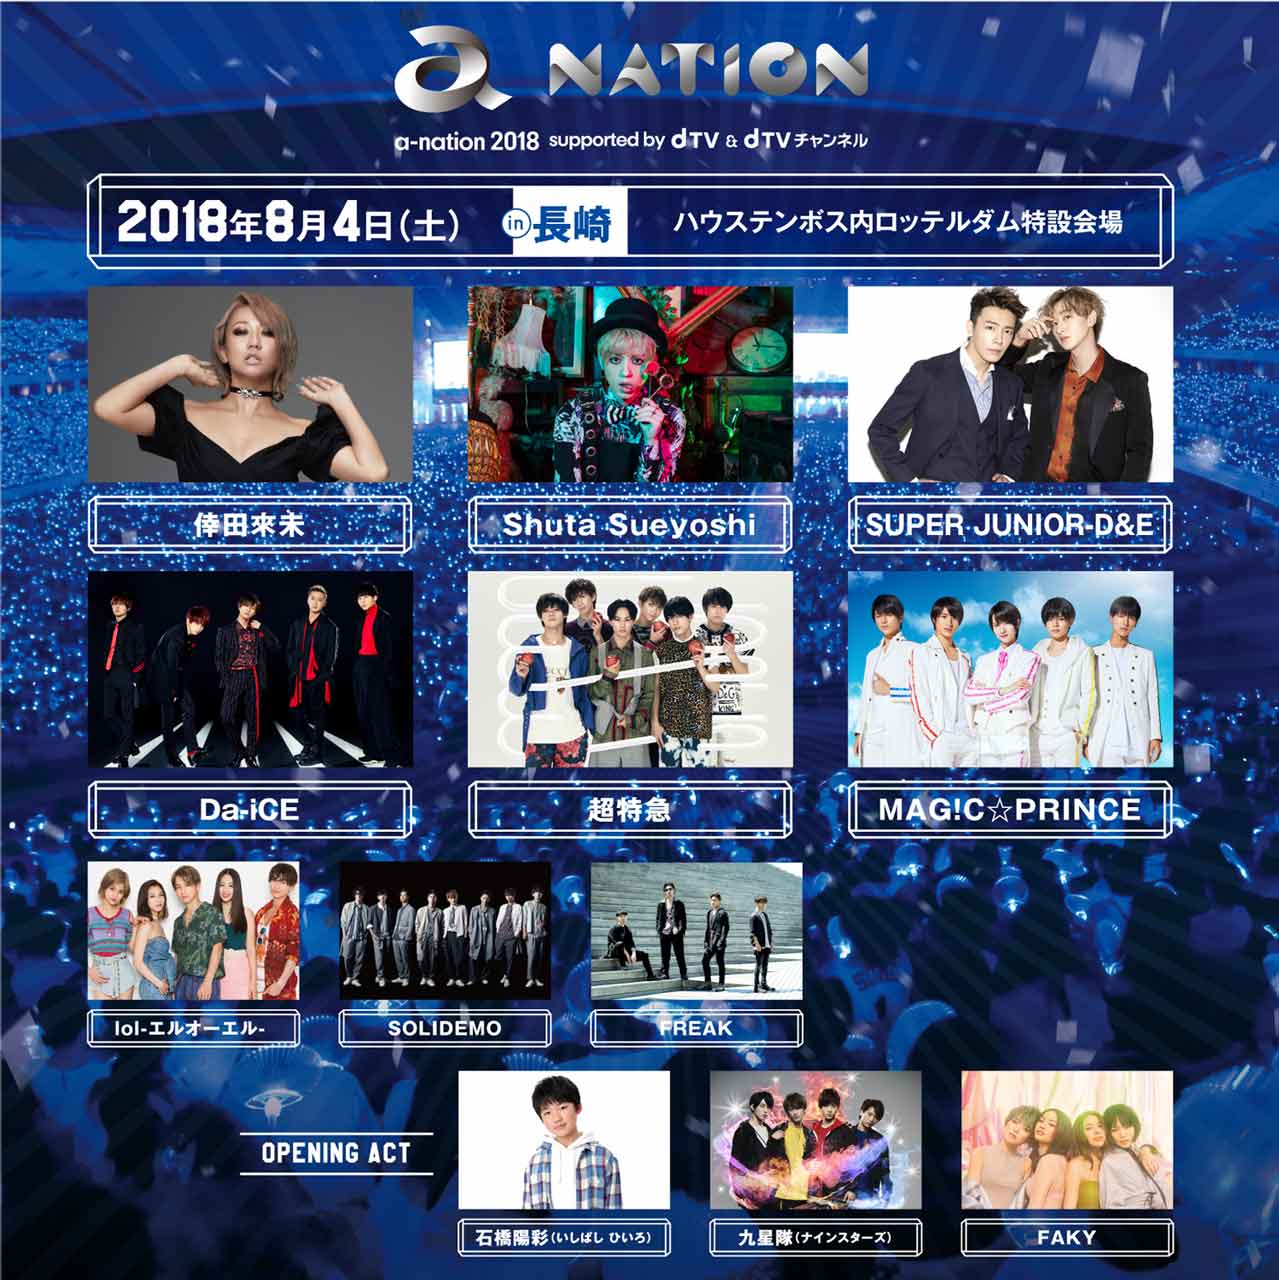 「a-nation 2018 supported by dTV & dTVチャンネル」長崎